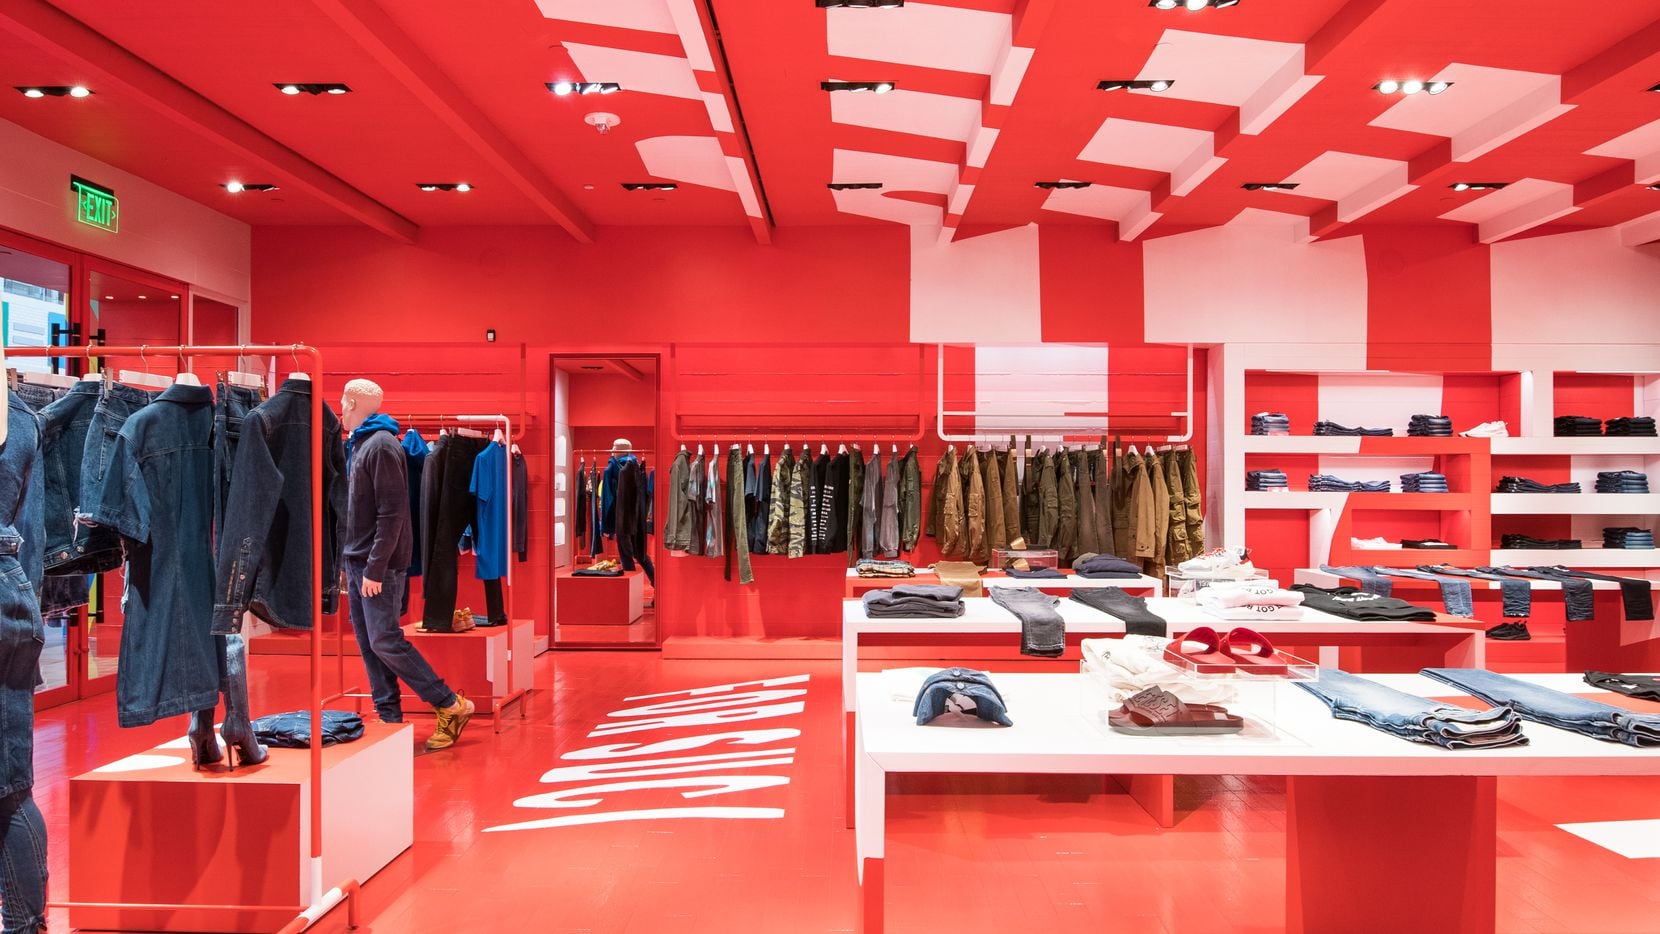 Red and white all over: Premium denim brand Diesel opened a new store at NorthPark Center in...